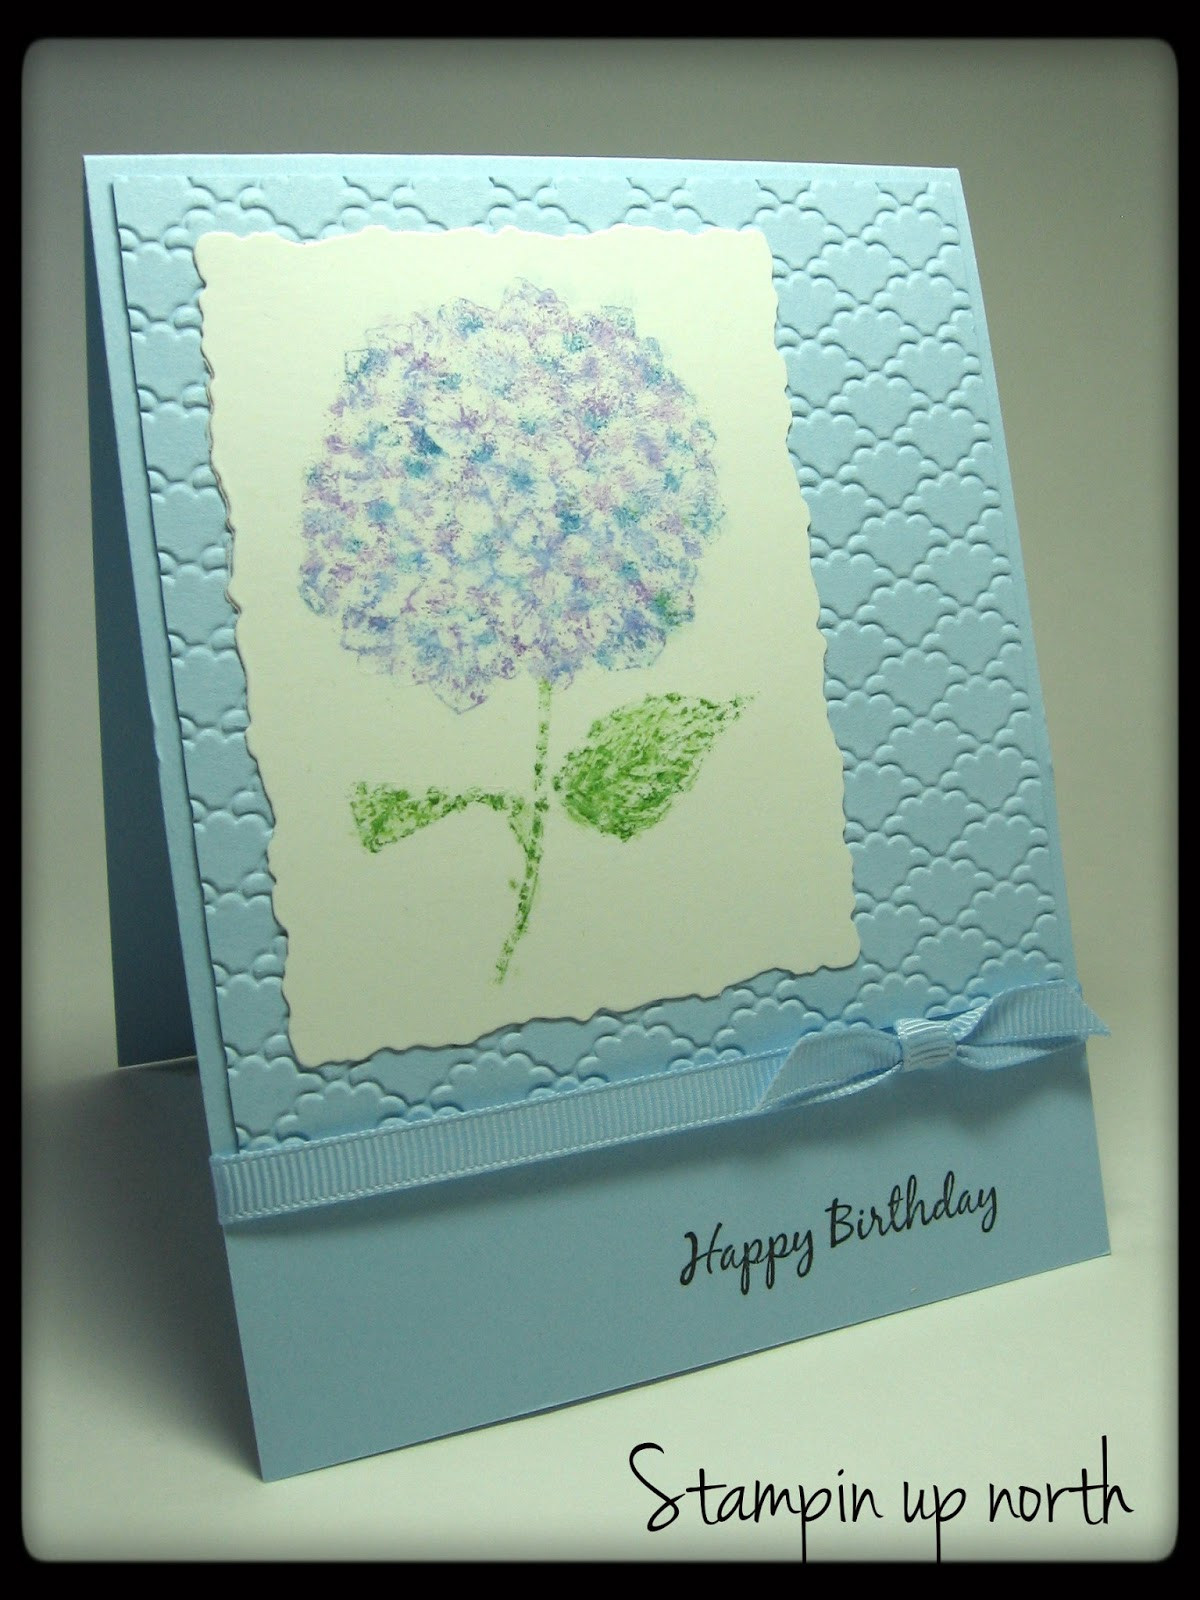 Stampin Up Birthday Cards
 stamping up north with laurie Stampin Up Birthday card